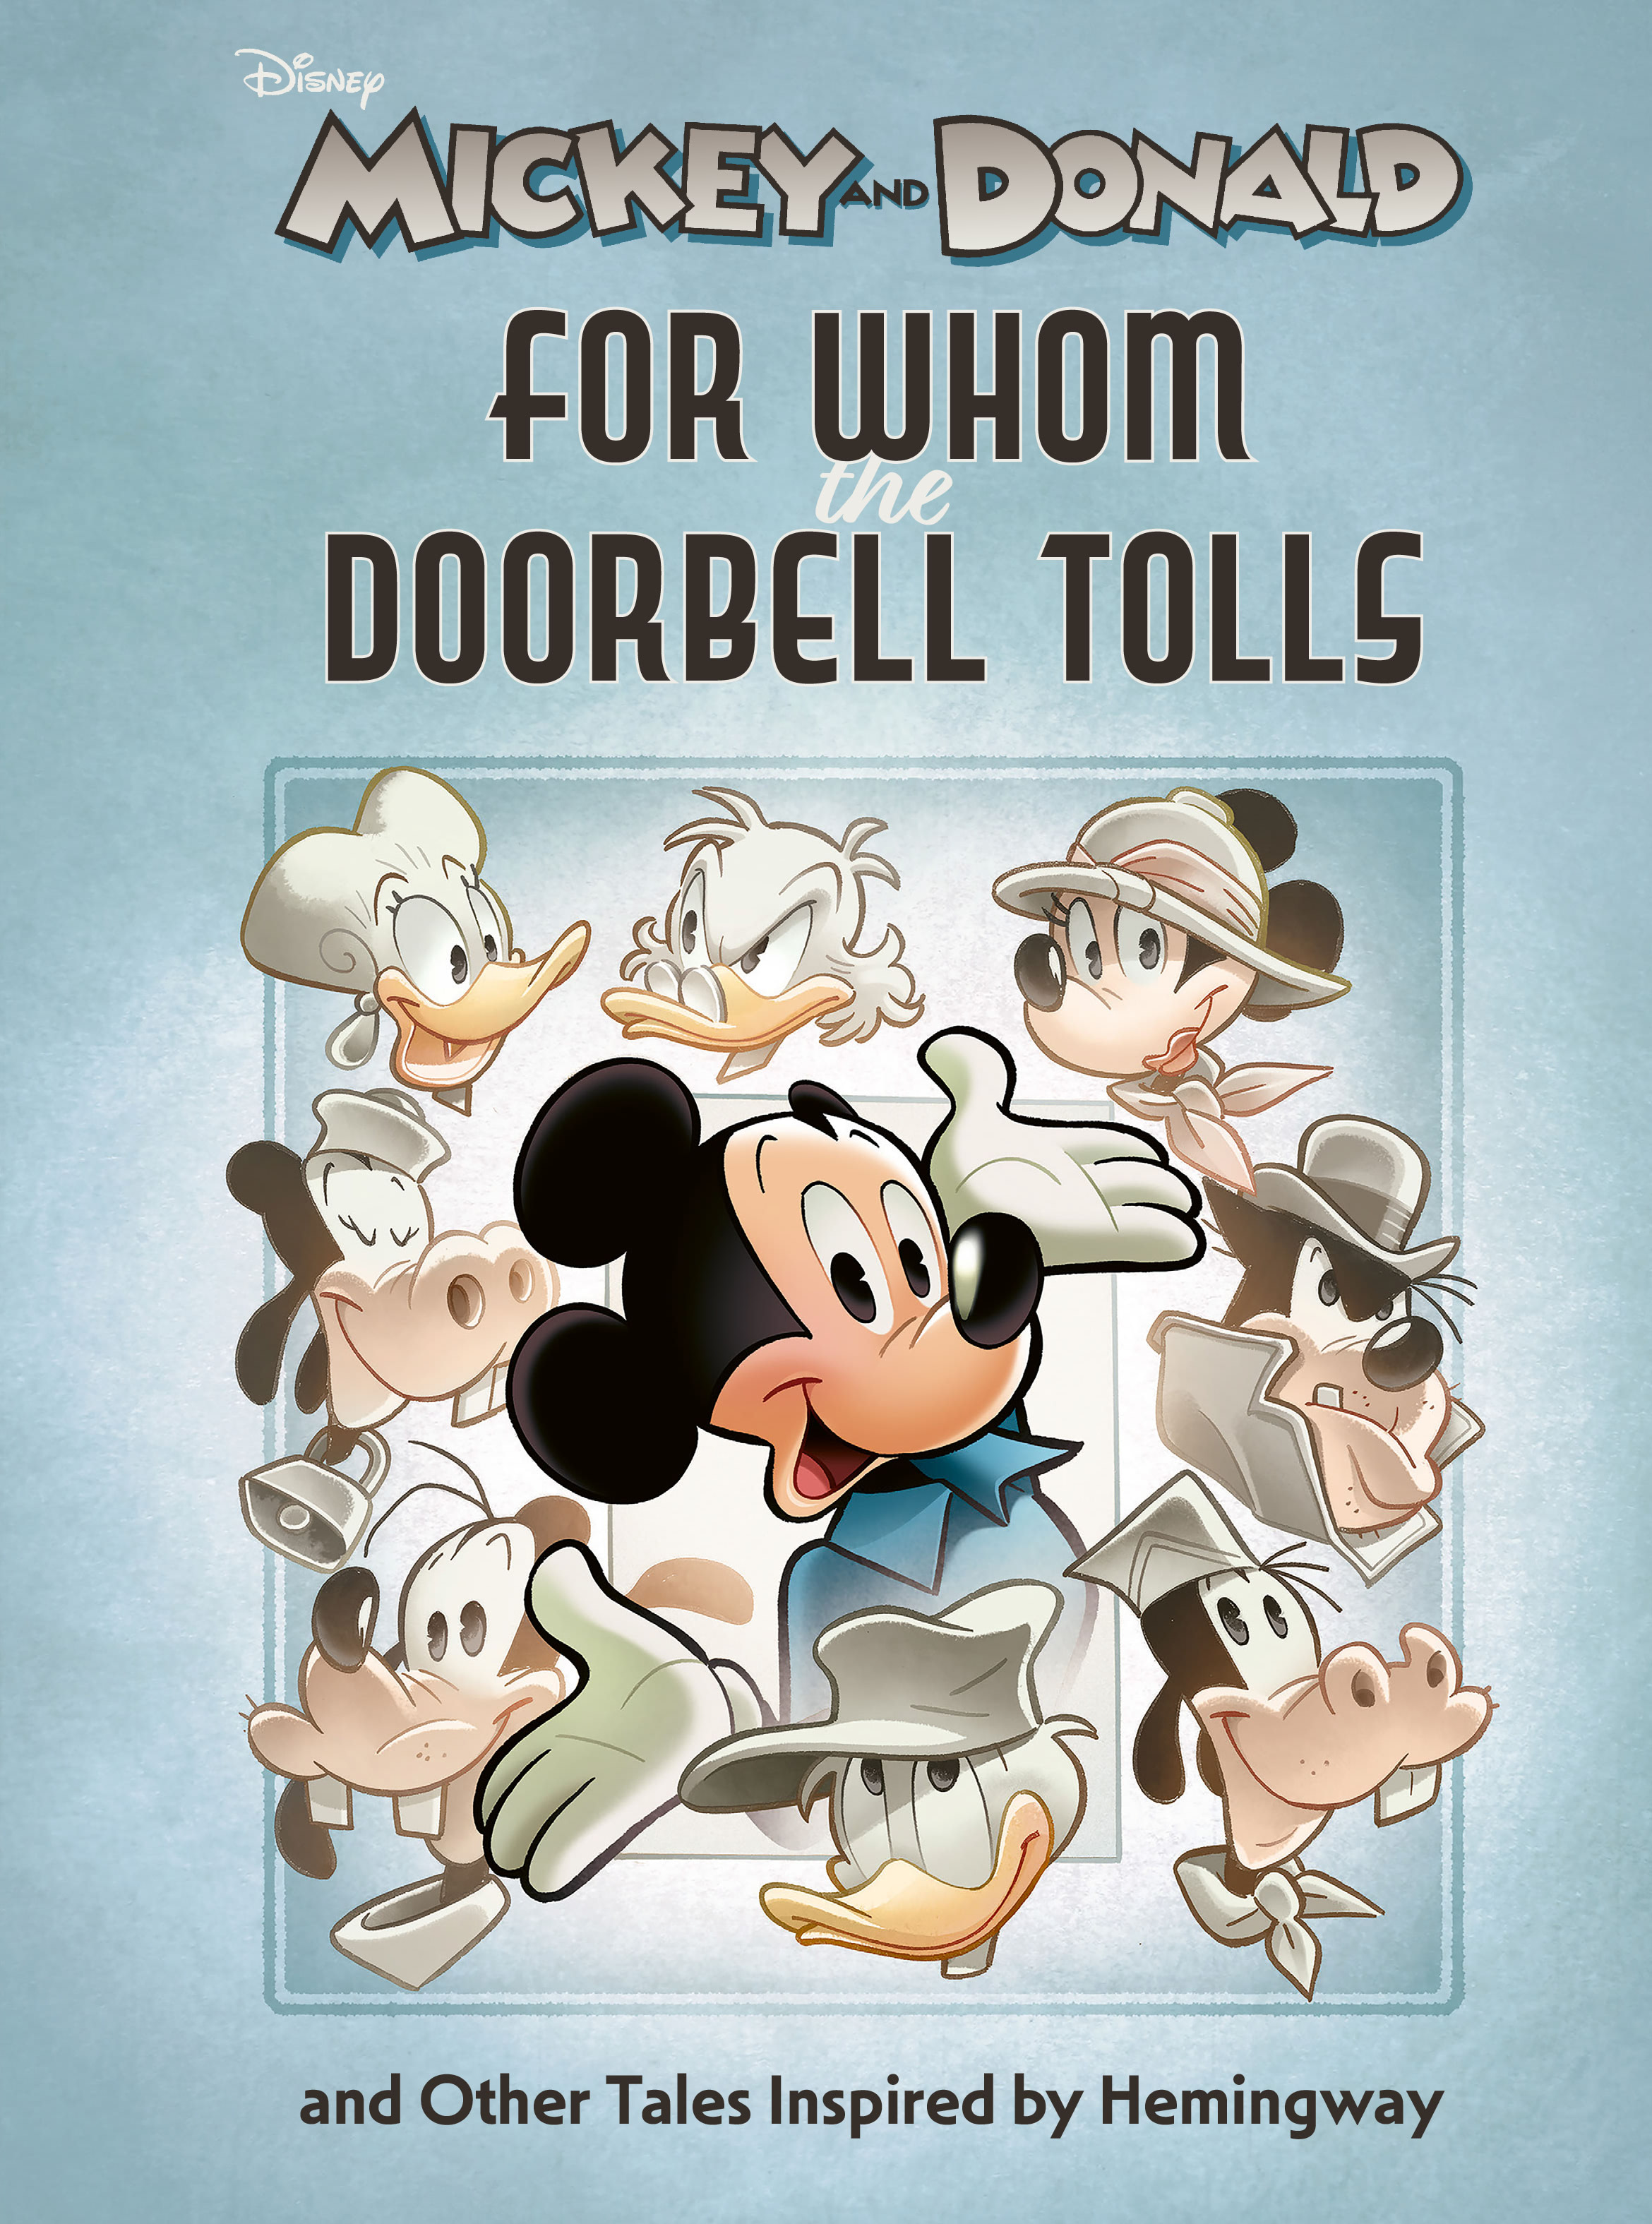 Read online Walt Disney's Mickey and Donald: "For Whom the Doorbell Tolls" and Other Tales Inspired by Hemingway comic -  Issue # TPB (Part 1) - 1